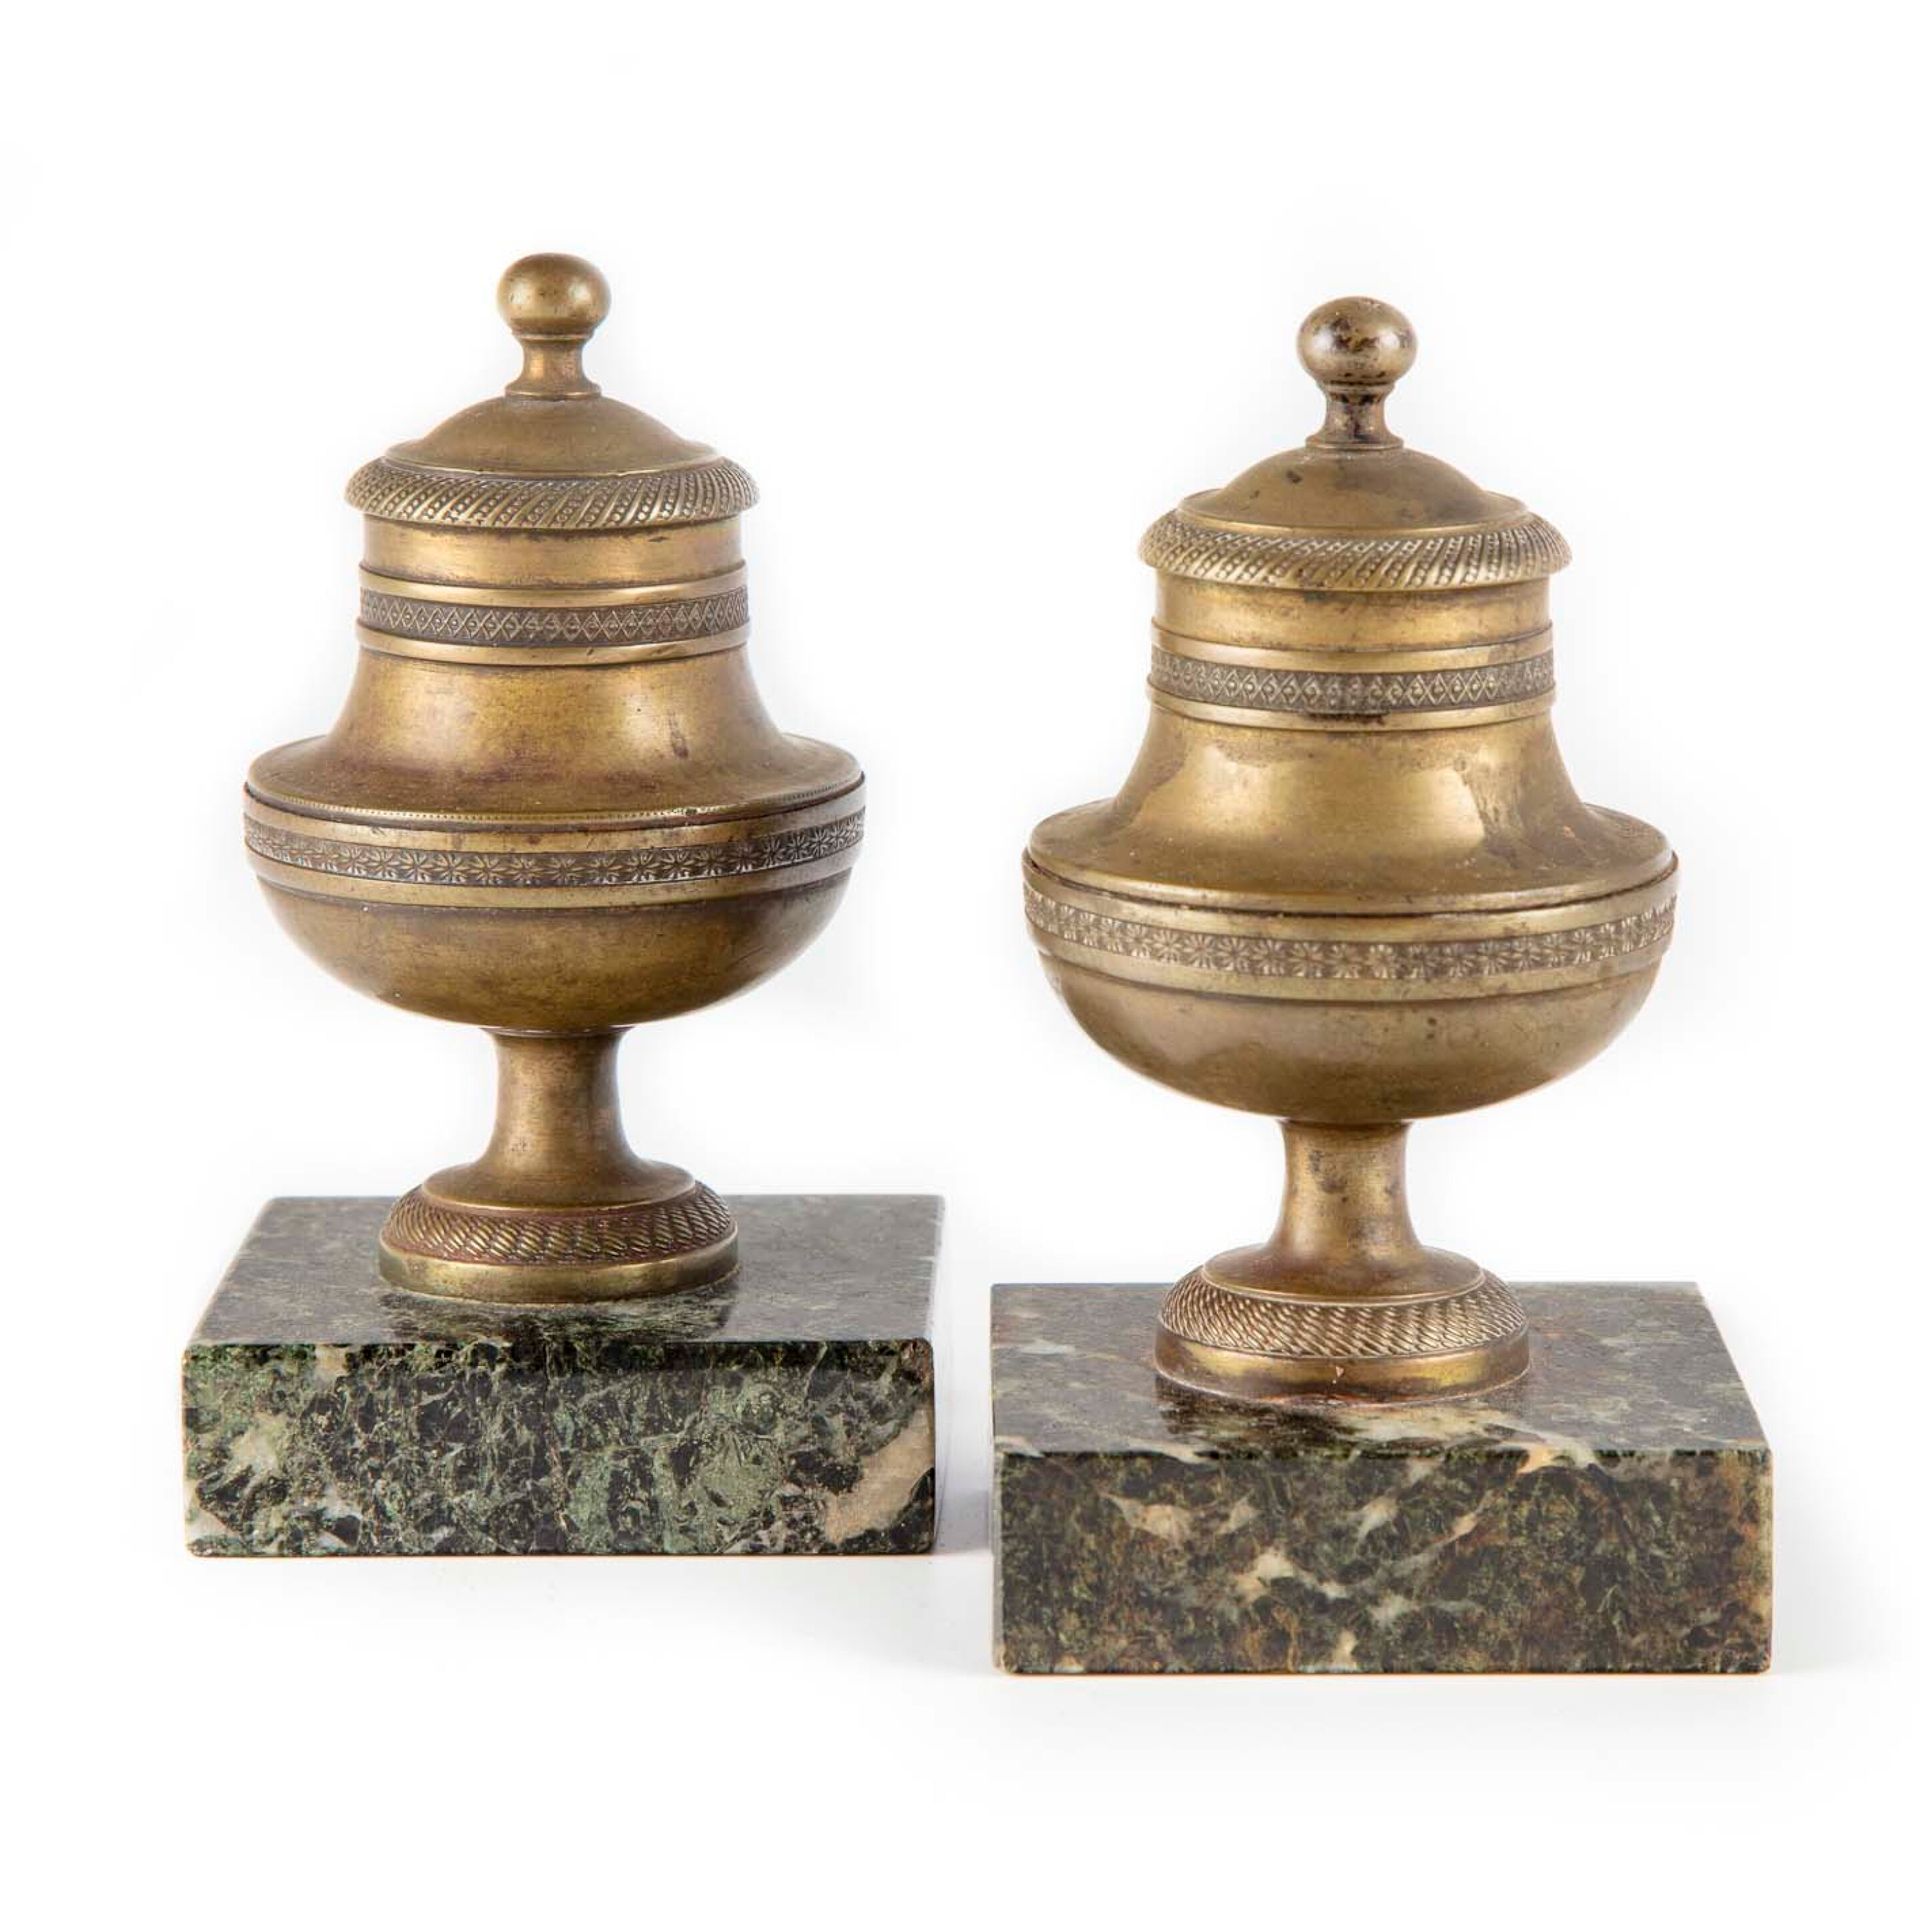 Null A pair of brass baluster paperweights resting on a marble base. 

H. 12 cm